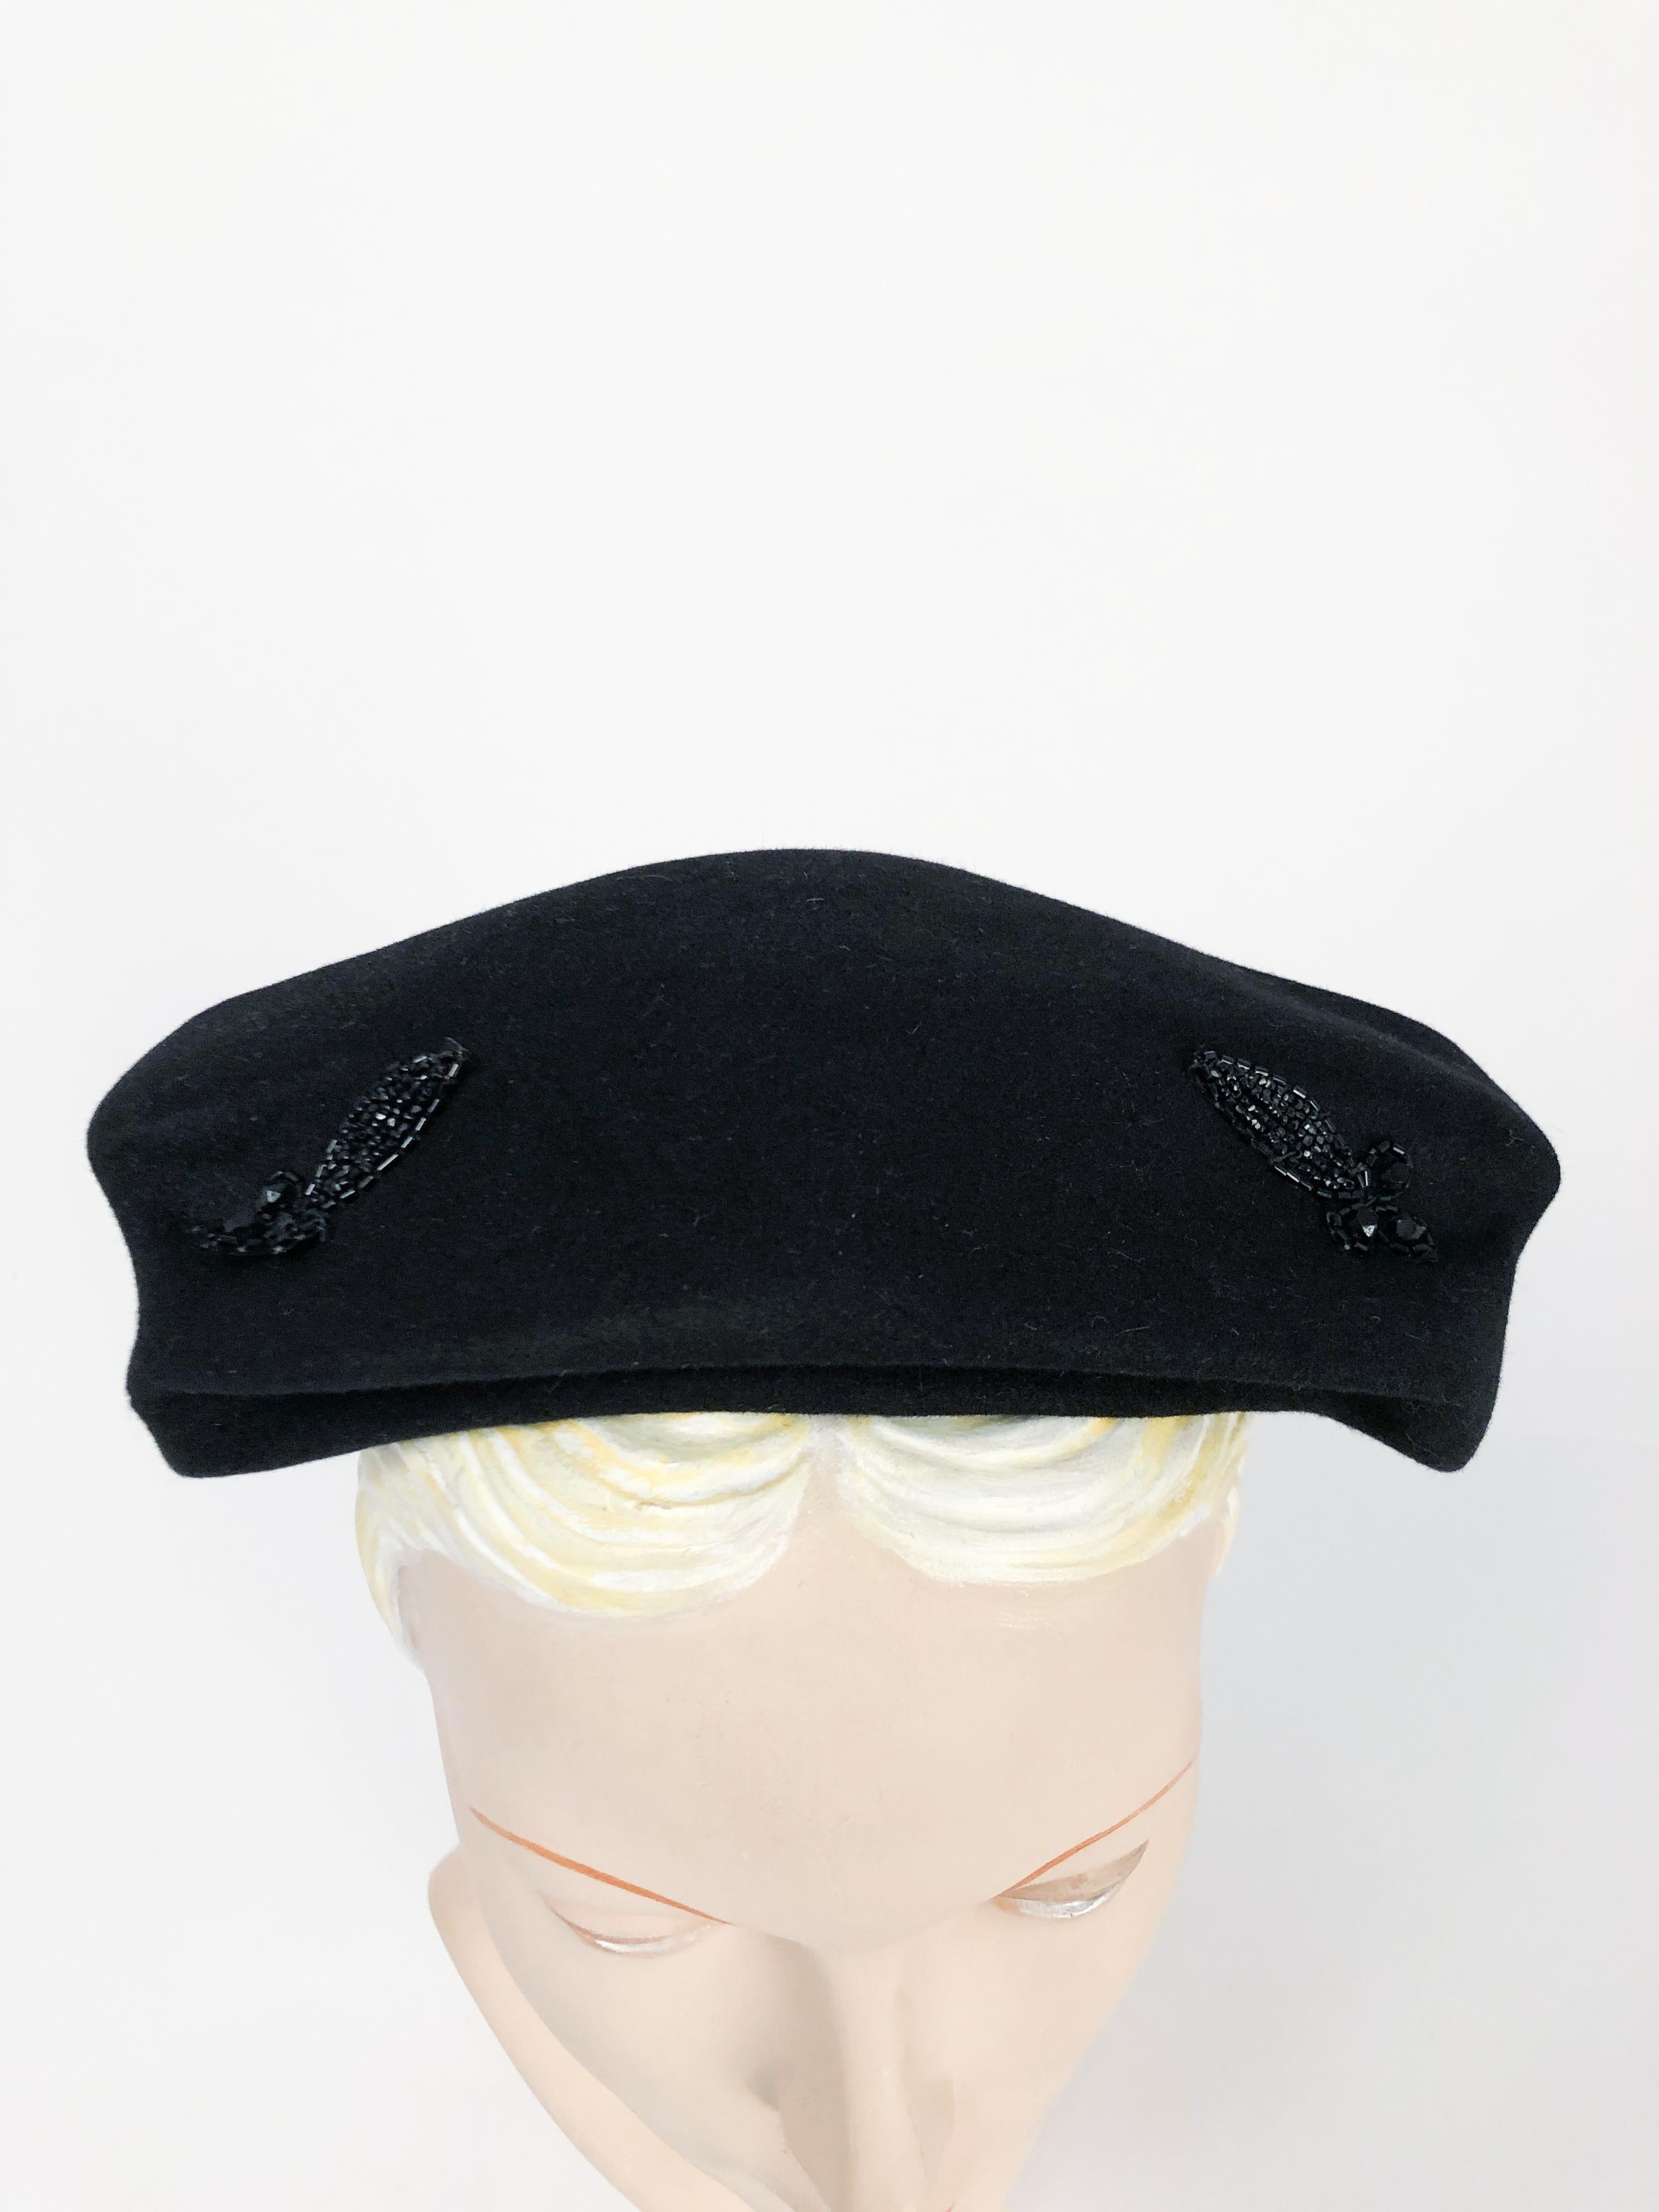 1950s Black Cashmere Sculptured Hat with Beadwork For Sale 2